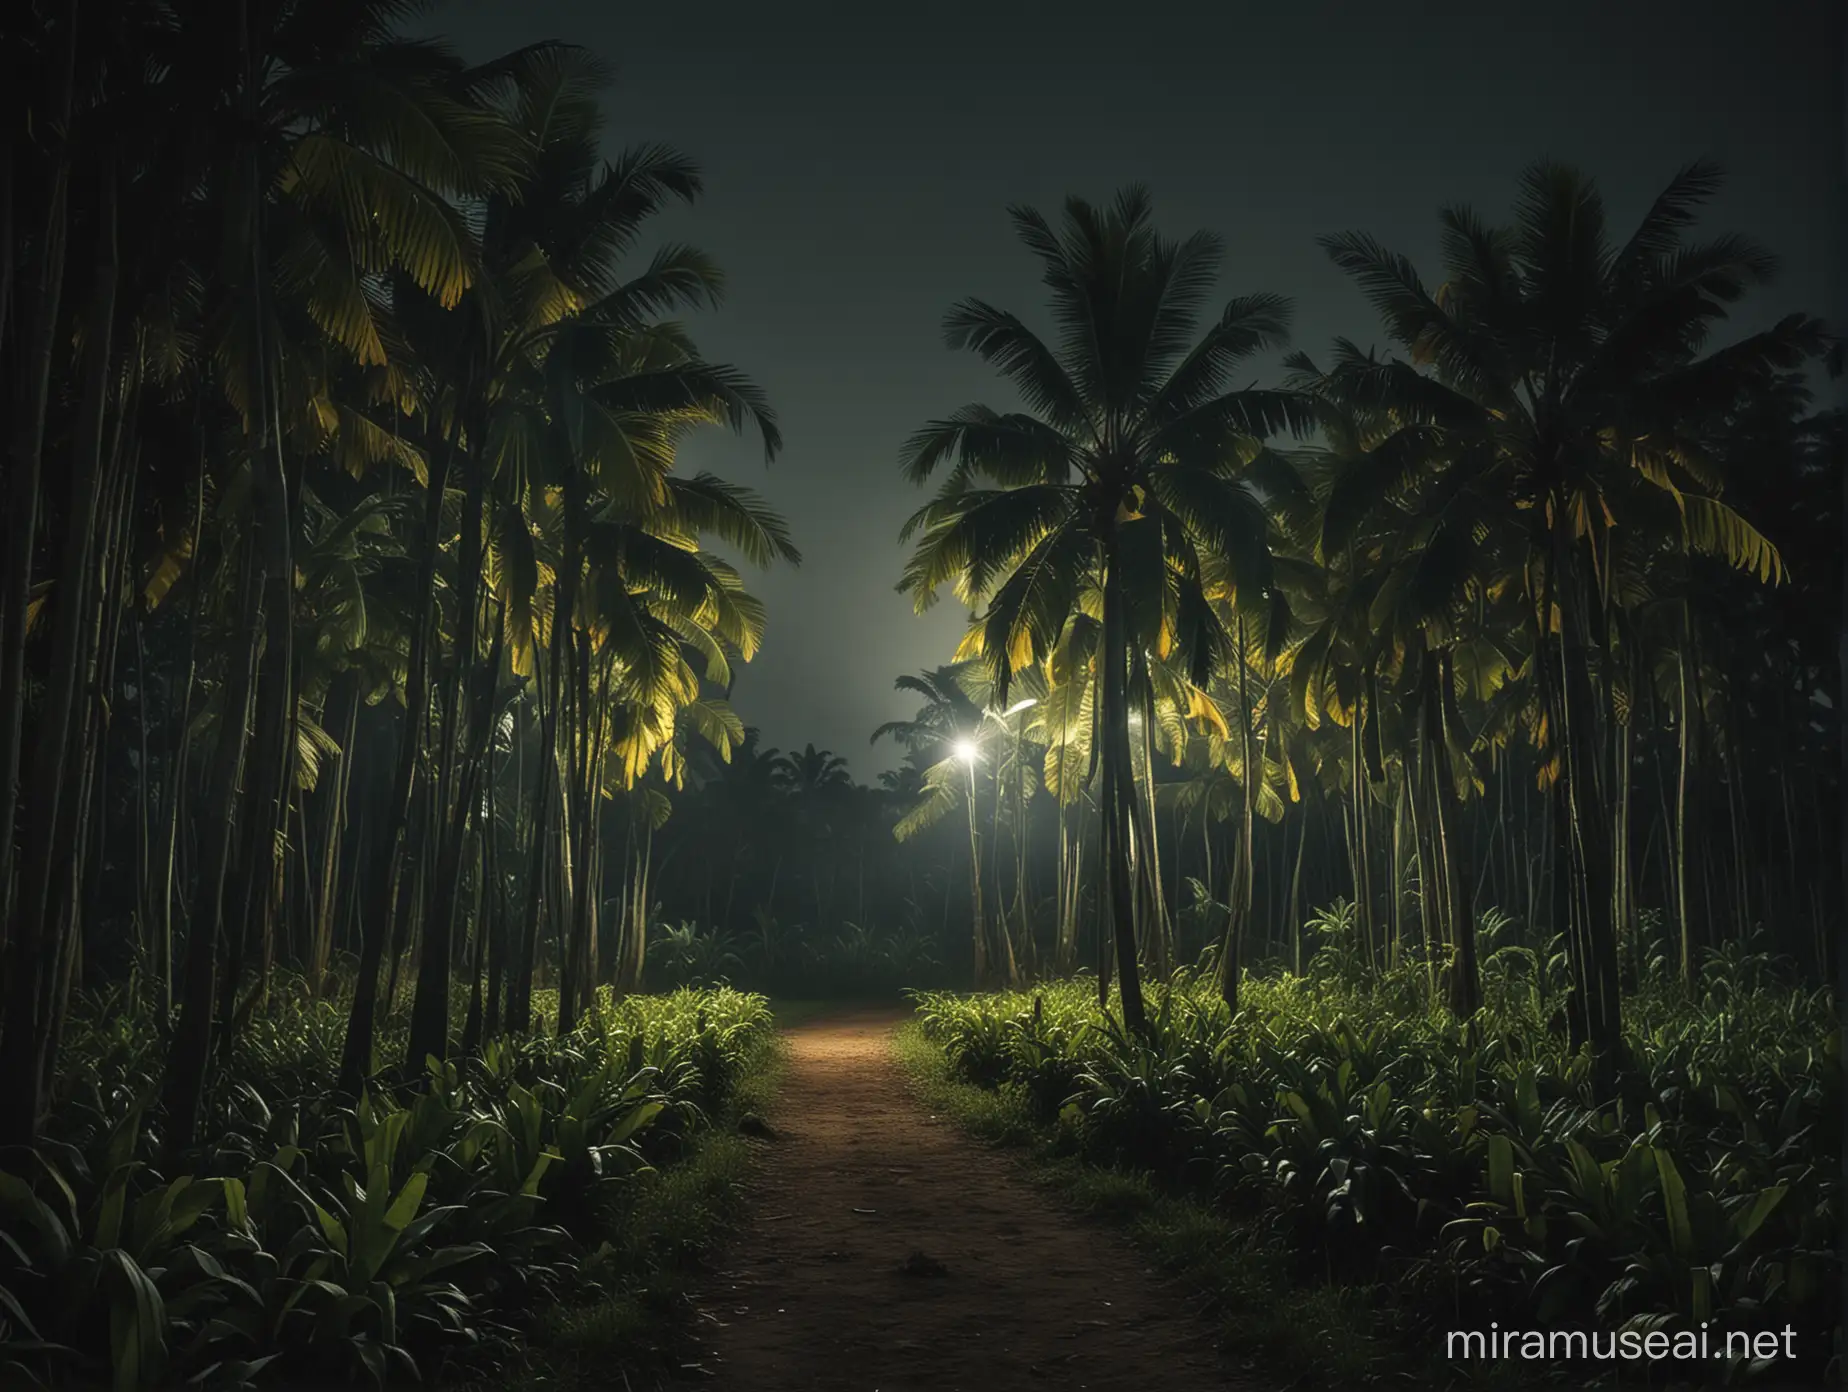 Eerie Night in Indonesian Countryside with Banana Trees